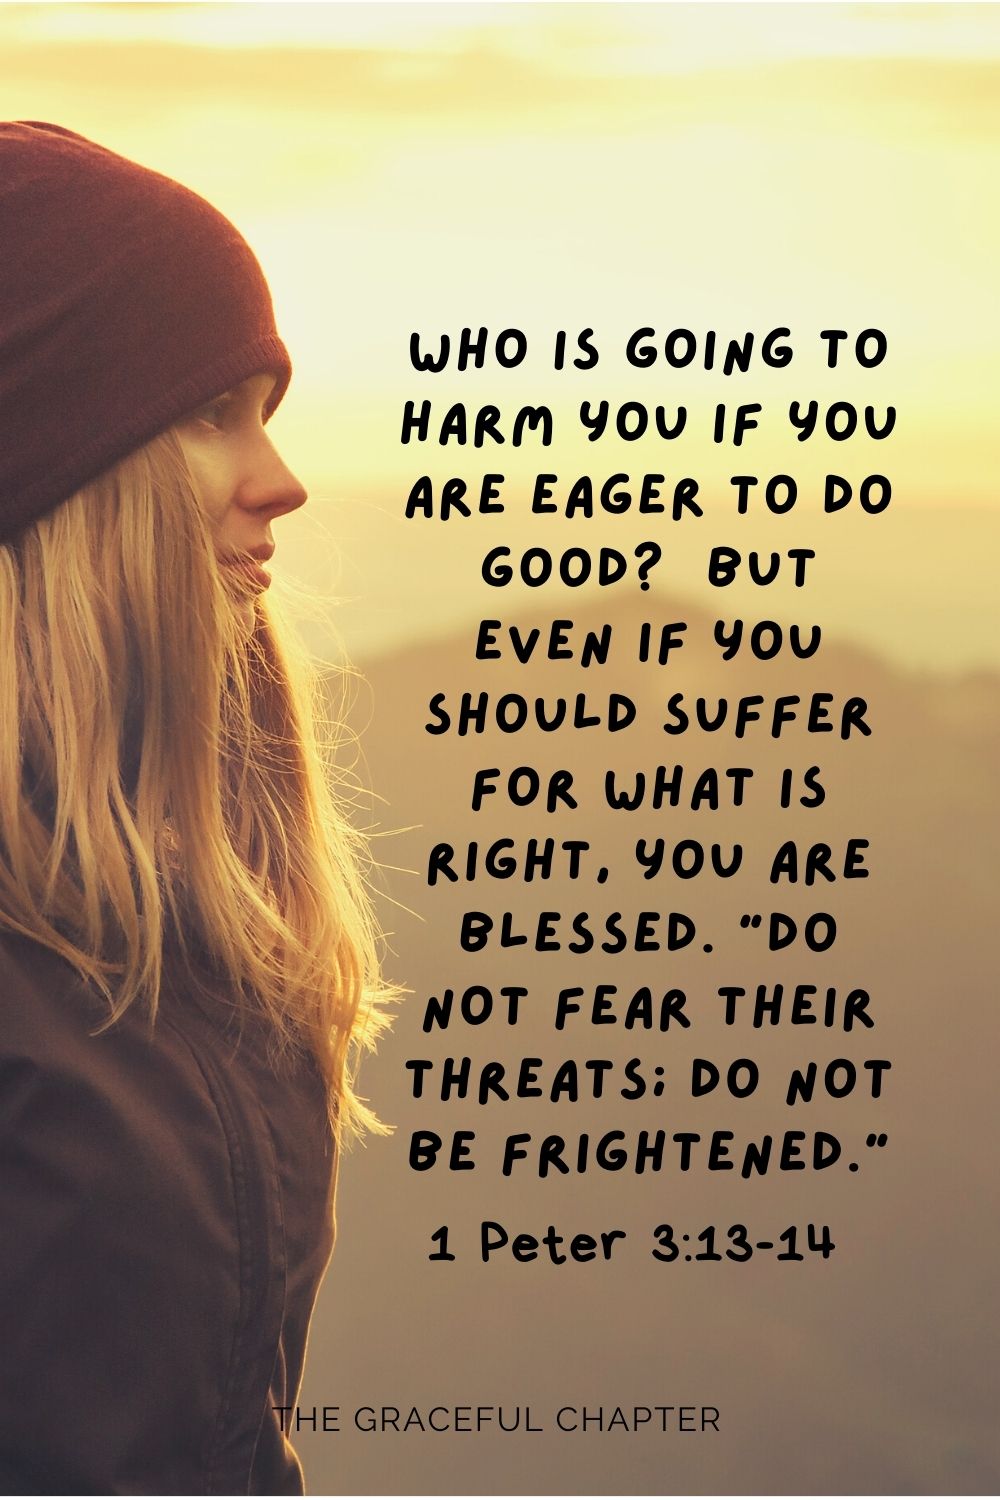 Who is going to harm you if you are eager to do good?  But even if you should suffer for what is right, you are blessed. “Do not fear their threats; do not be frightened.” 1 Peter 3:13-14